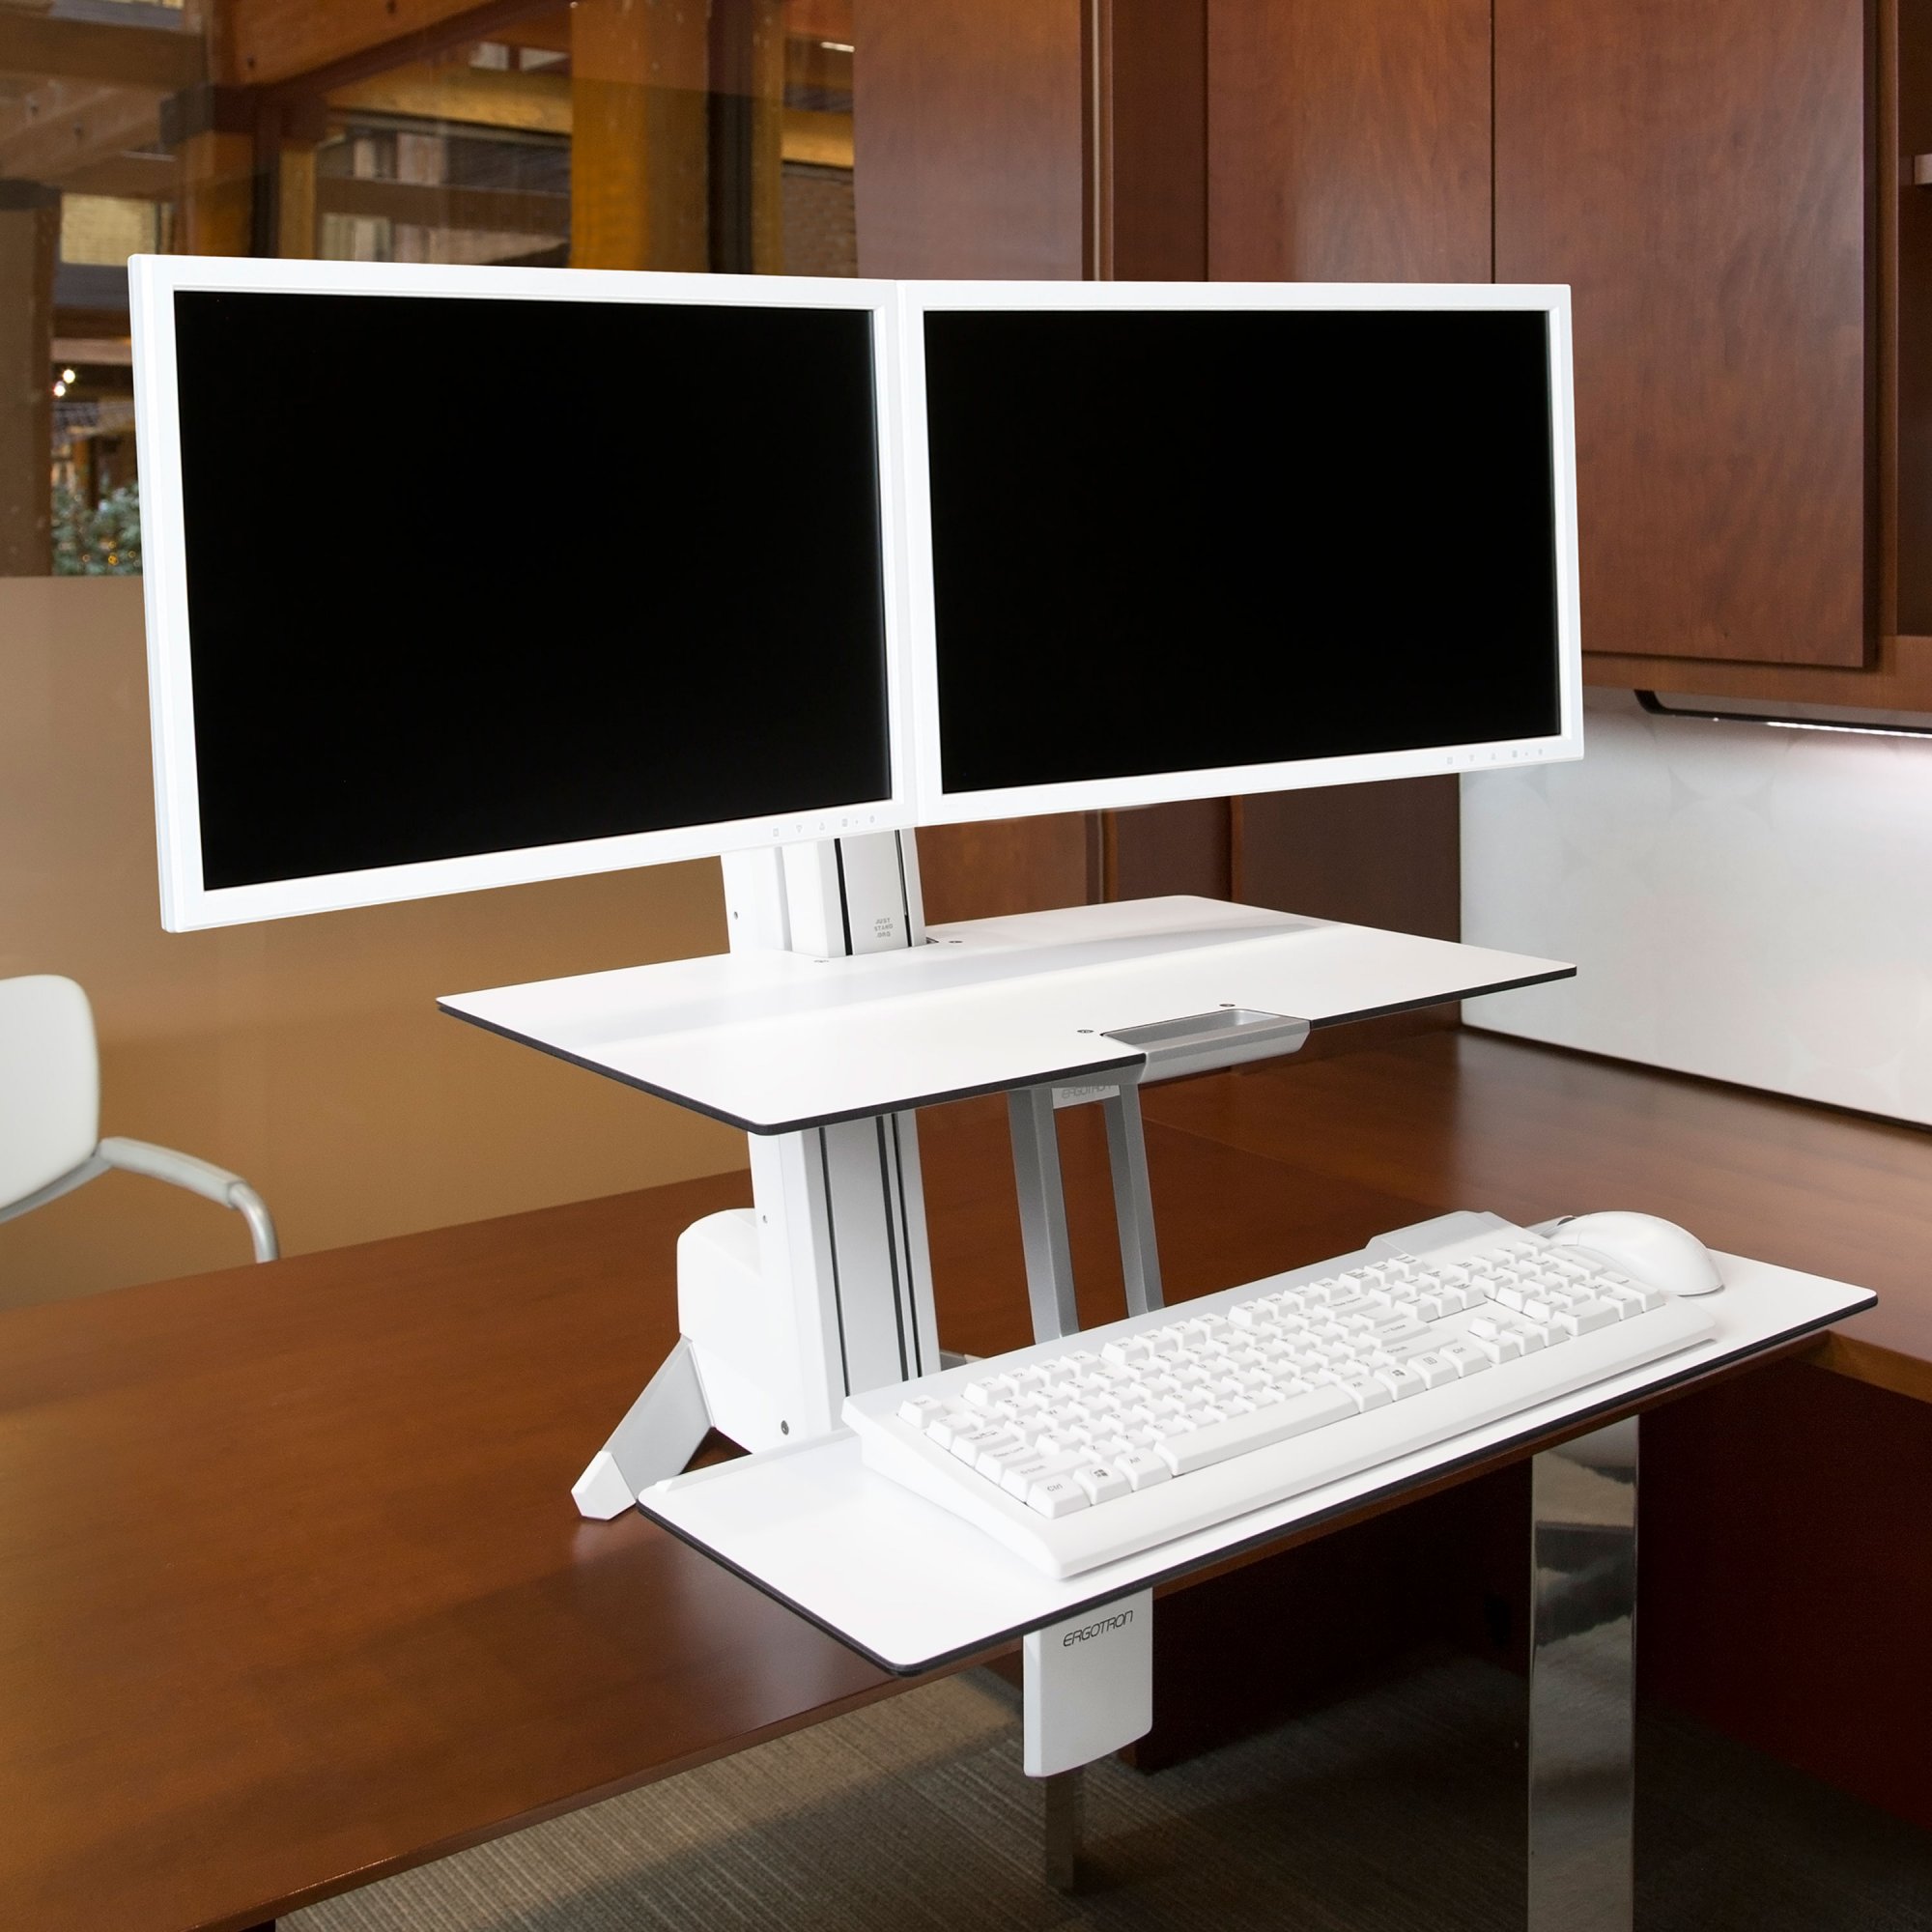 Ergotron 33-349-211 WorkFit-S, Dual Monitor with Worksurface